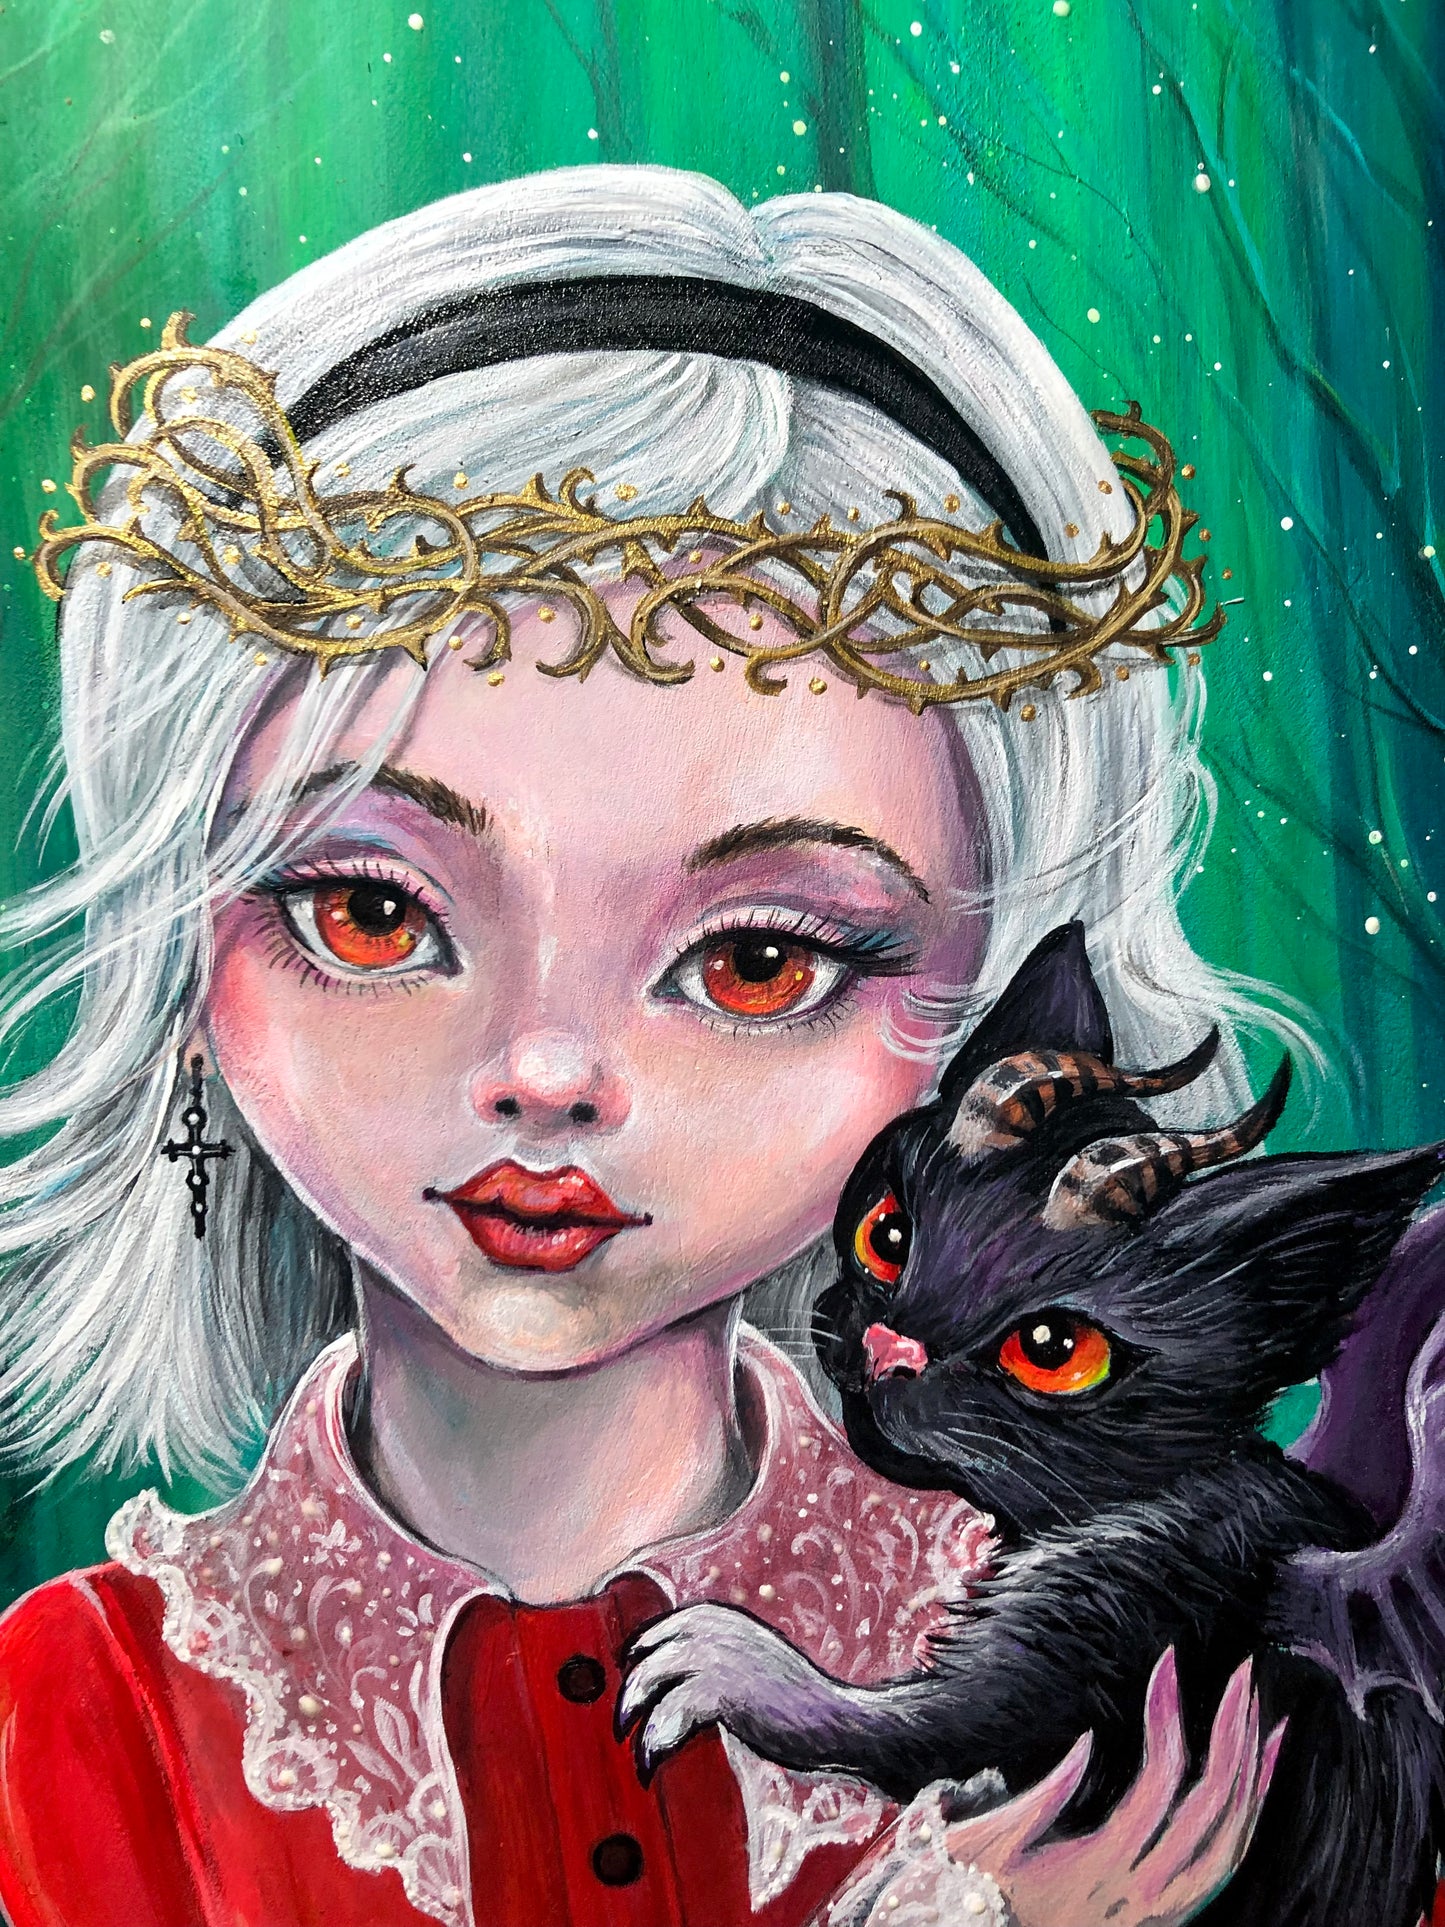 CANVAS "Sabrina and Salem" Open & Limited Edition